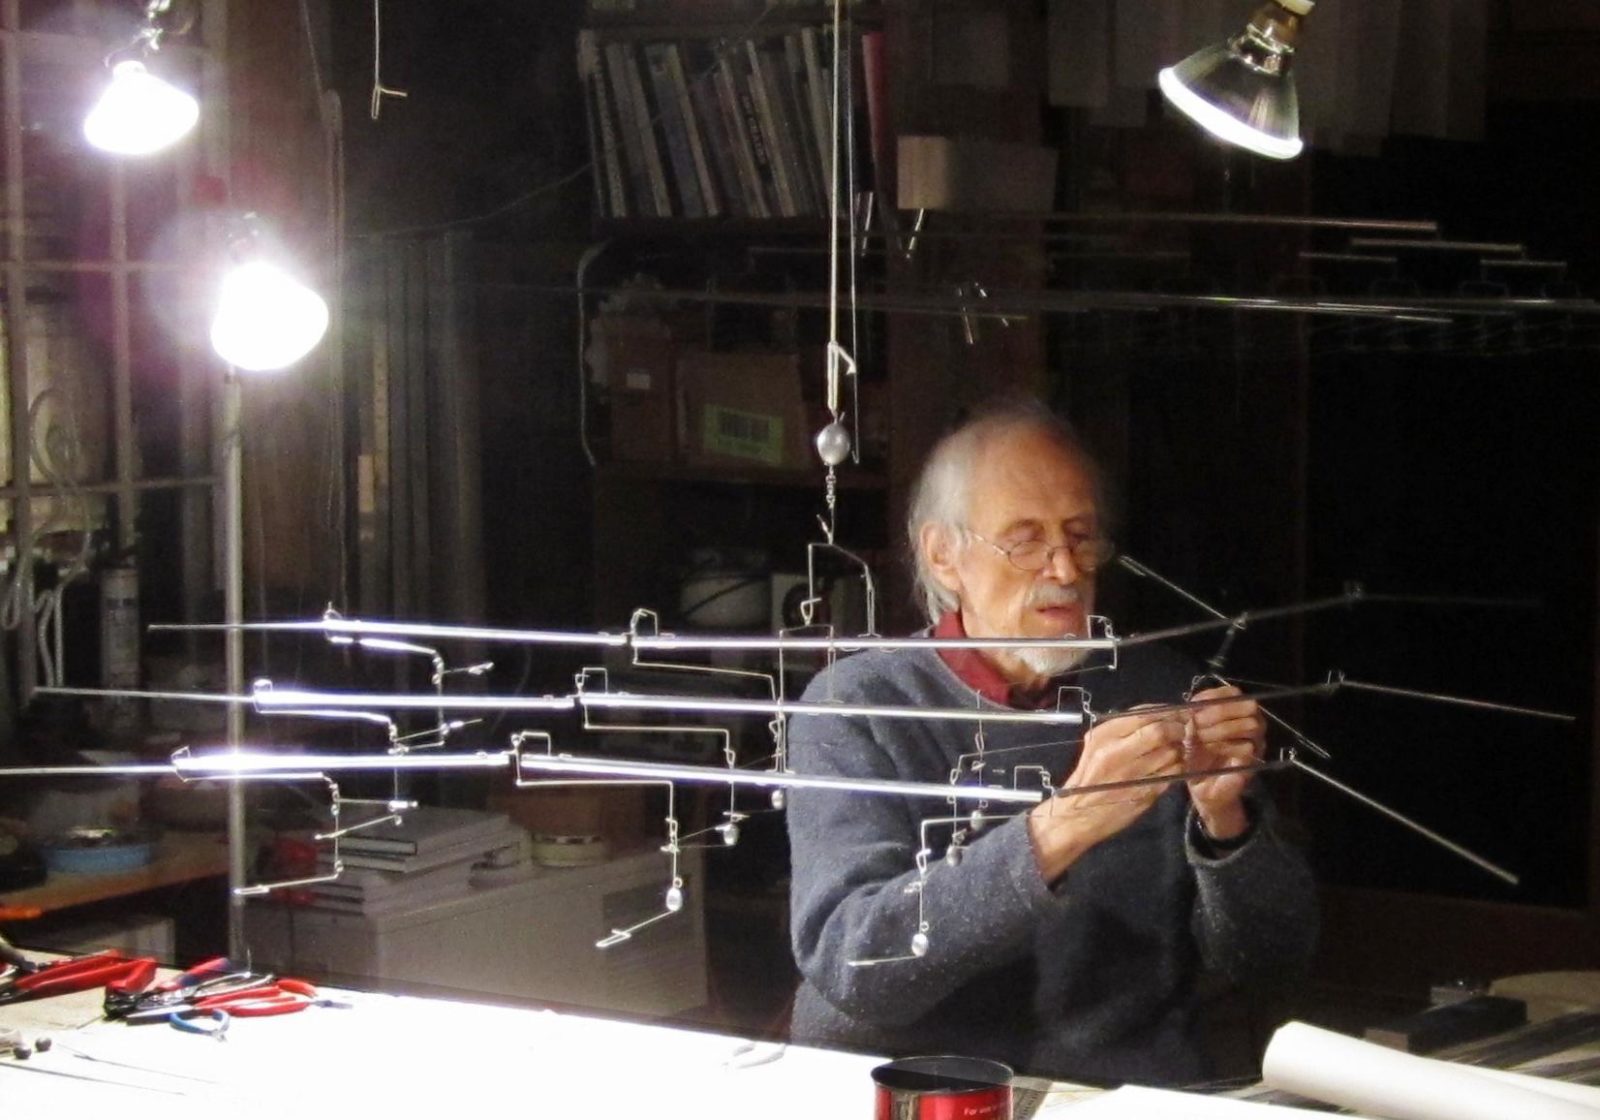 Older man with white whispy hair sitting at a table with bright lights to the right, working on an aluminum mobile hanging from the ceiling